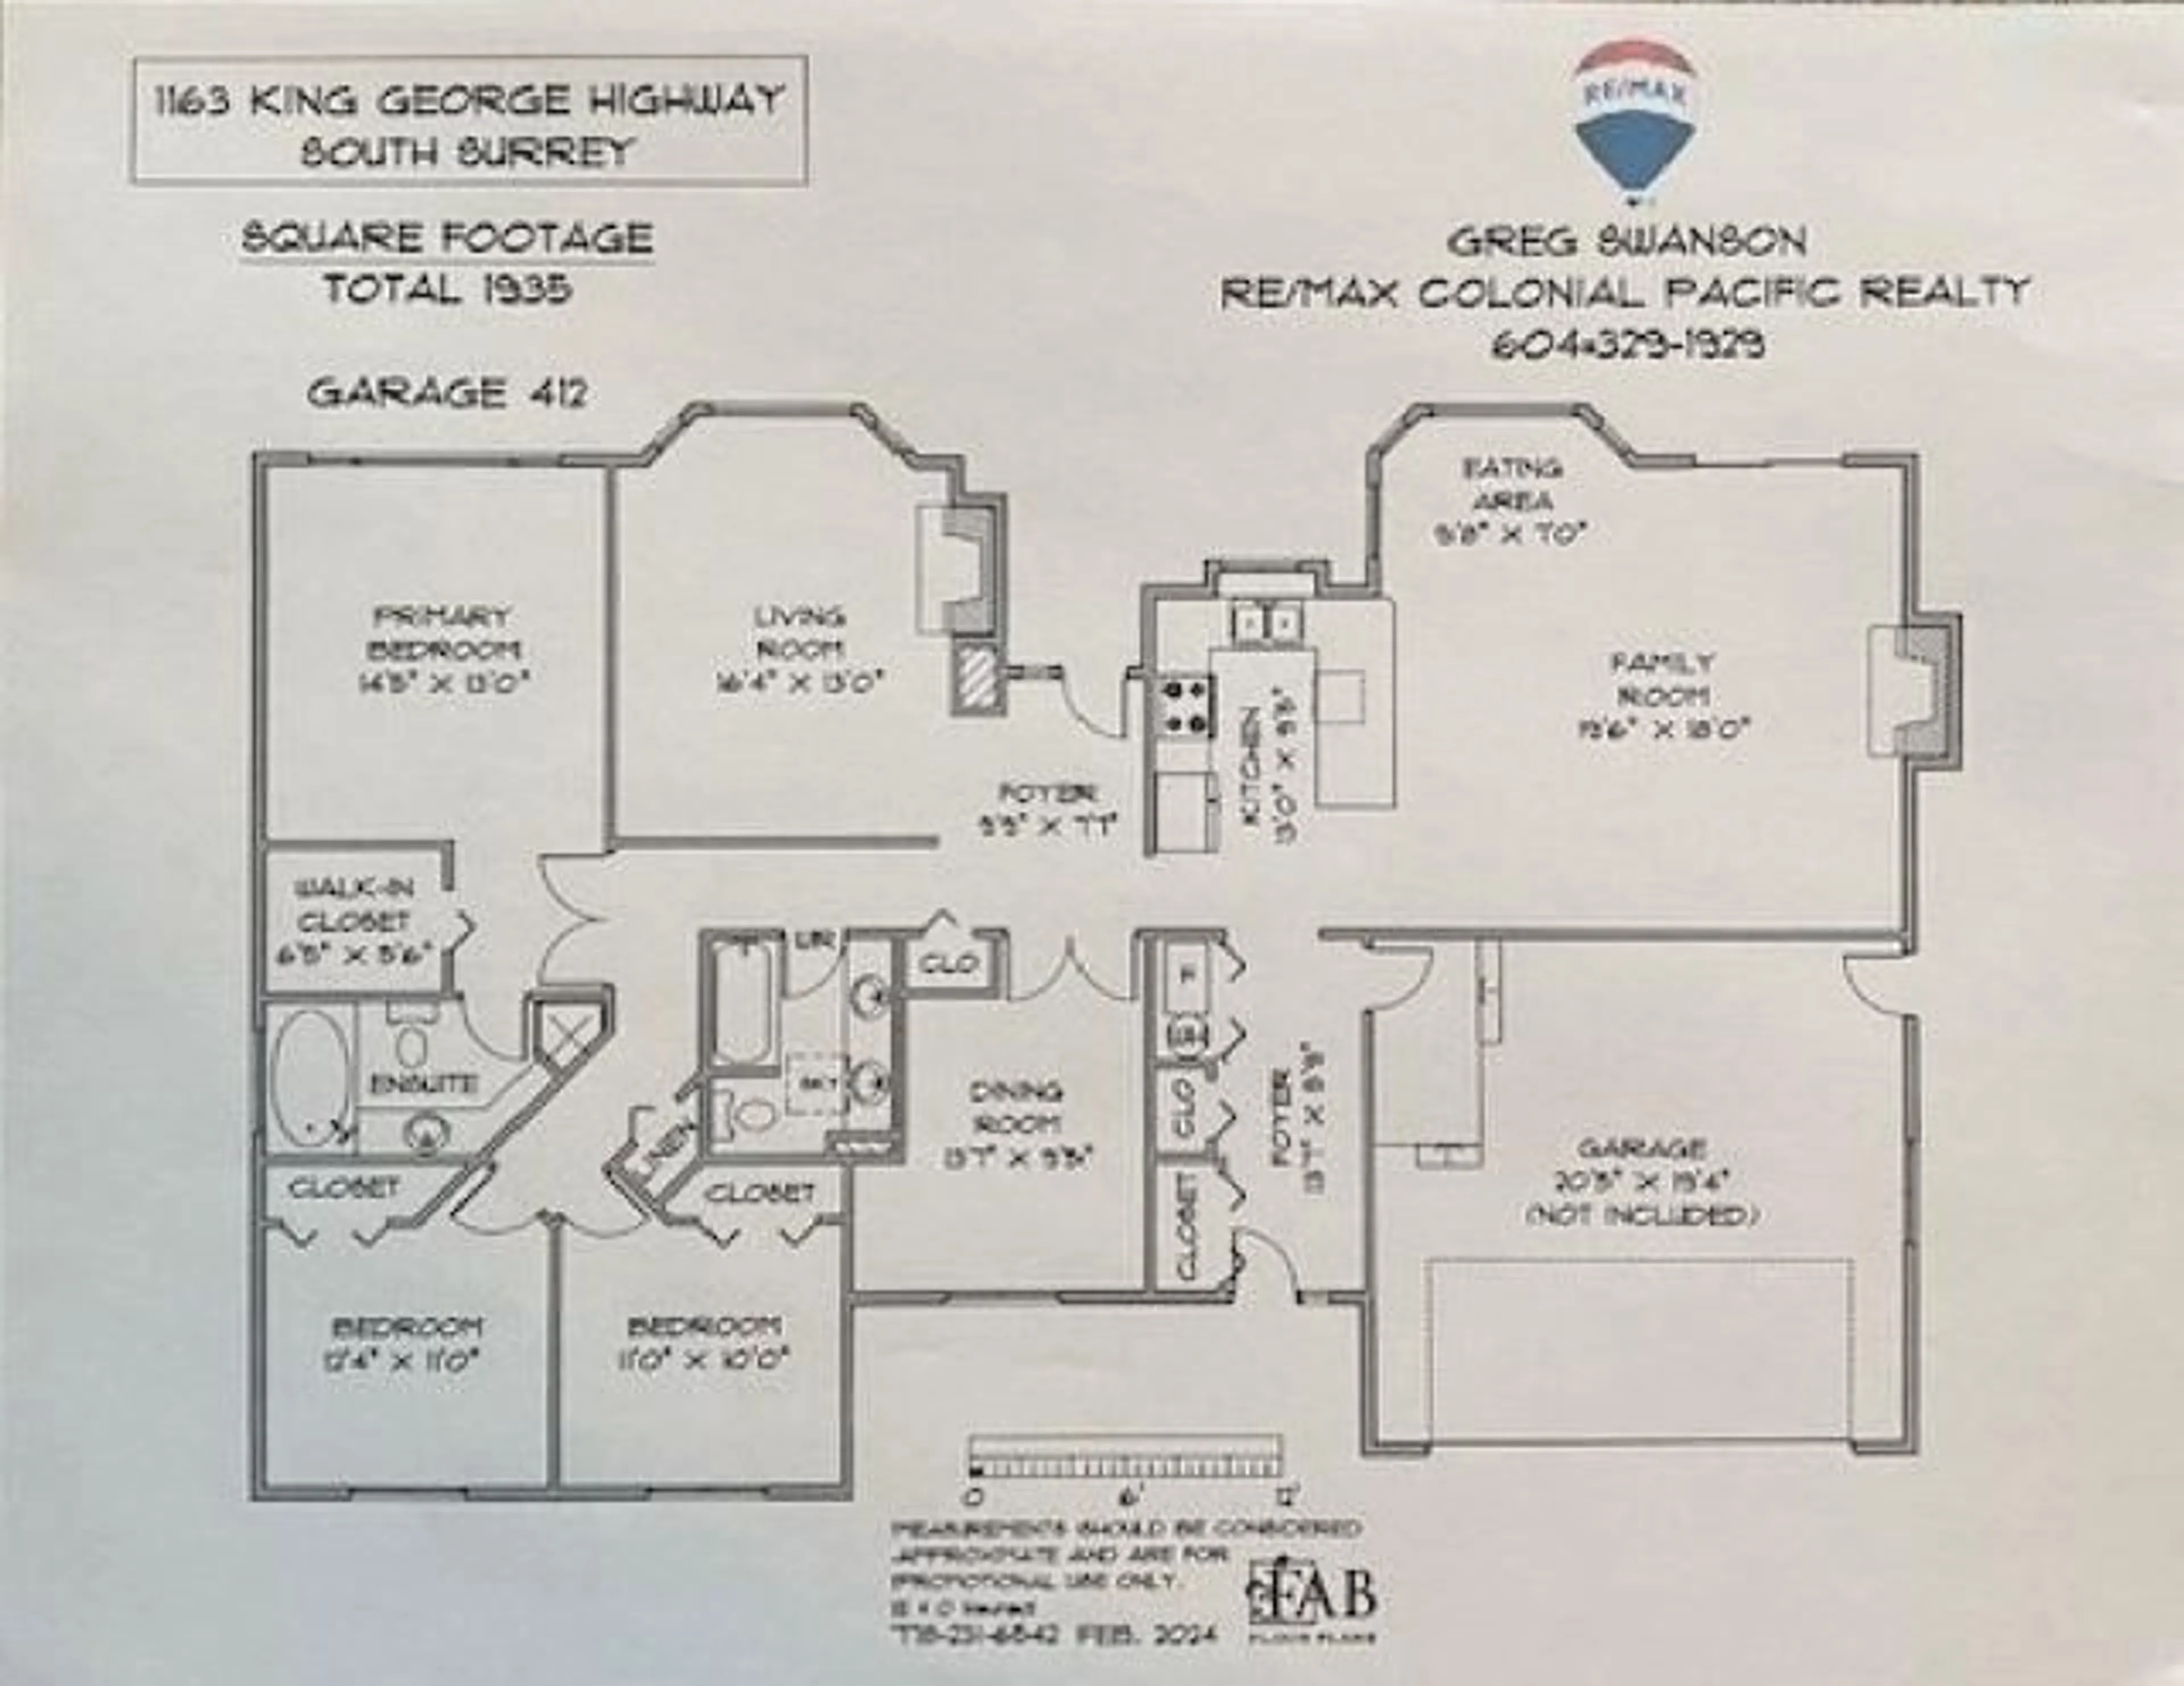 Floor plan for 1163 KING GEORGE BOULEVARD, Surrey British Columbia V4A4Z1